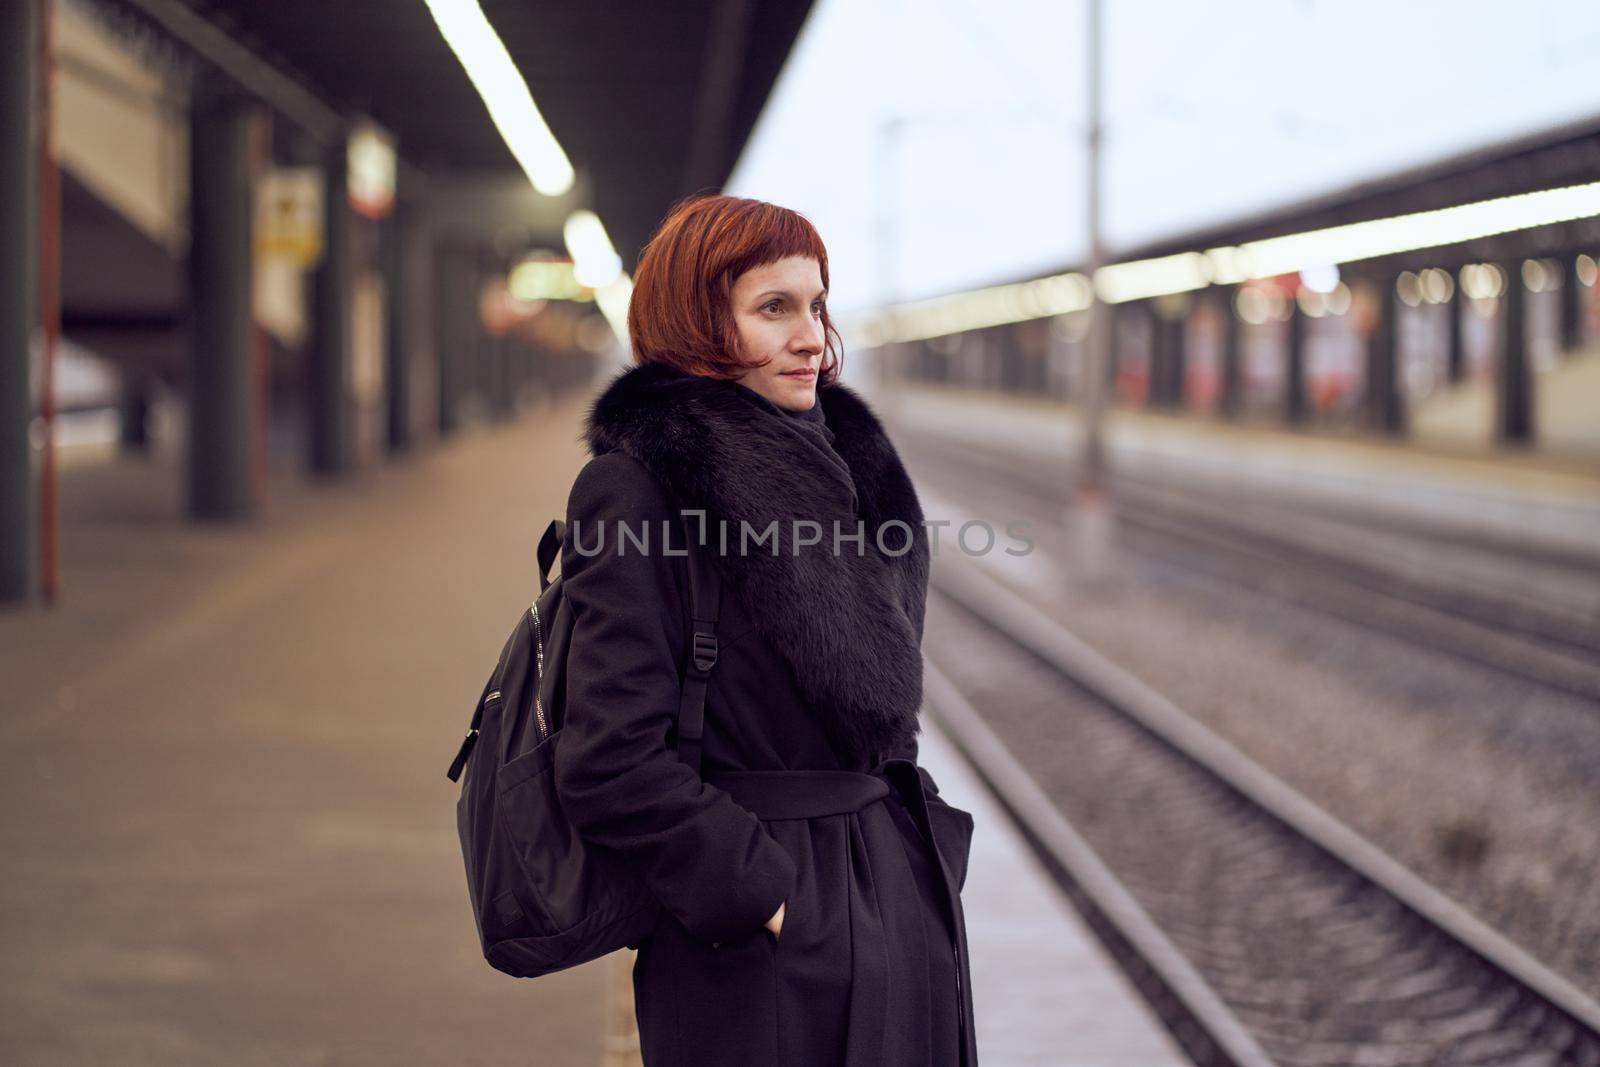 Railway station. Beautiful girl is standing on platform and waiting for train. Woman travels light in evening. Middle-aged lady in warm clothes, coat, in winter. Banner